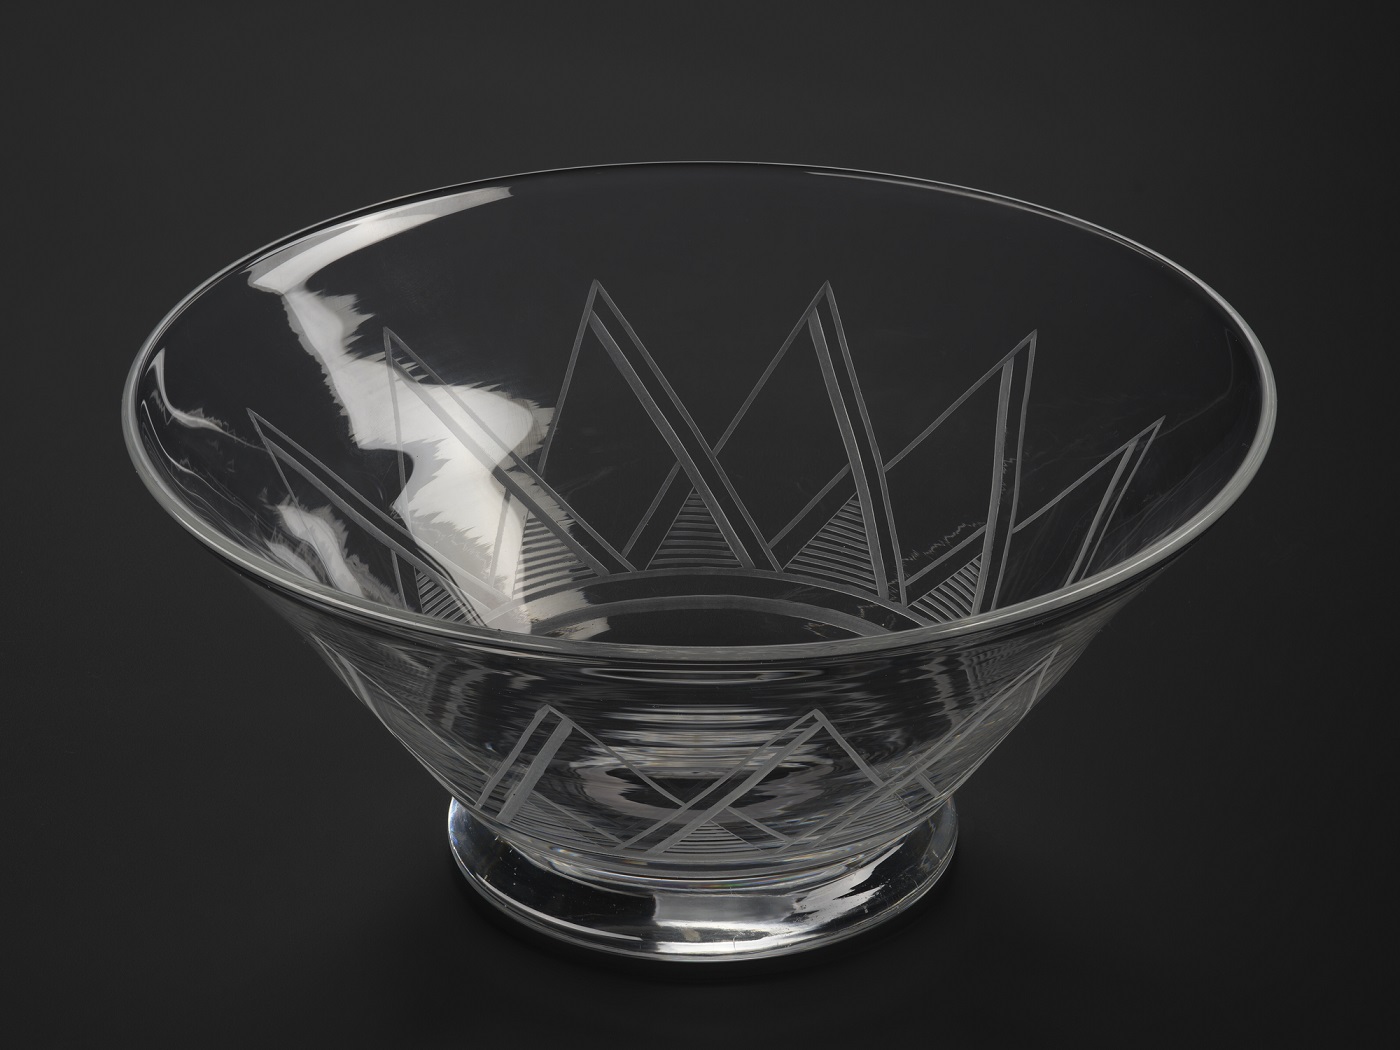 A clear glass bowl, much wider at the top than the bottom, decorated with a pattern of repeated triangles radiating up from the basin. On the left, part of the bowl catches a glare.